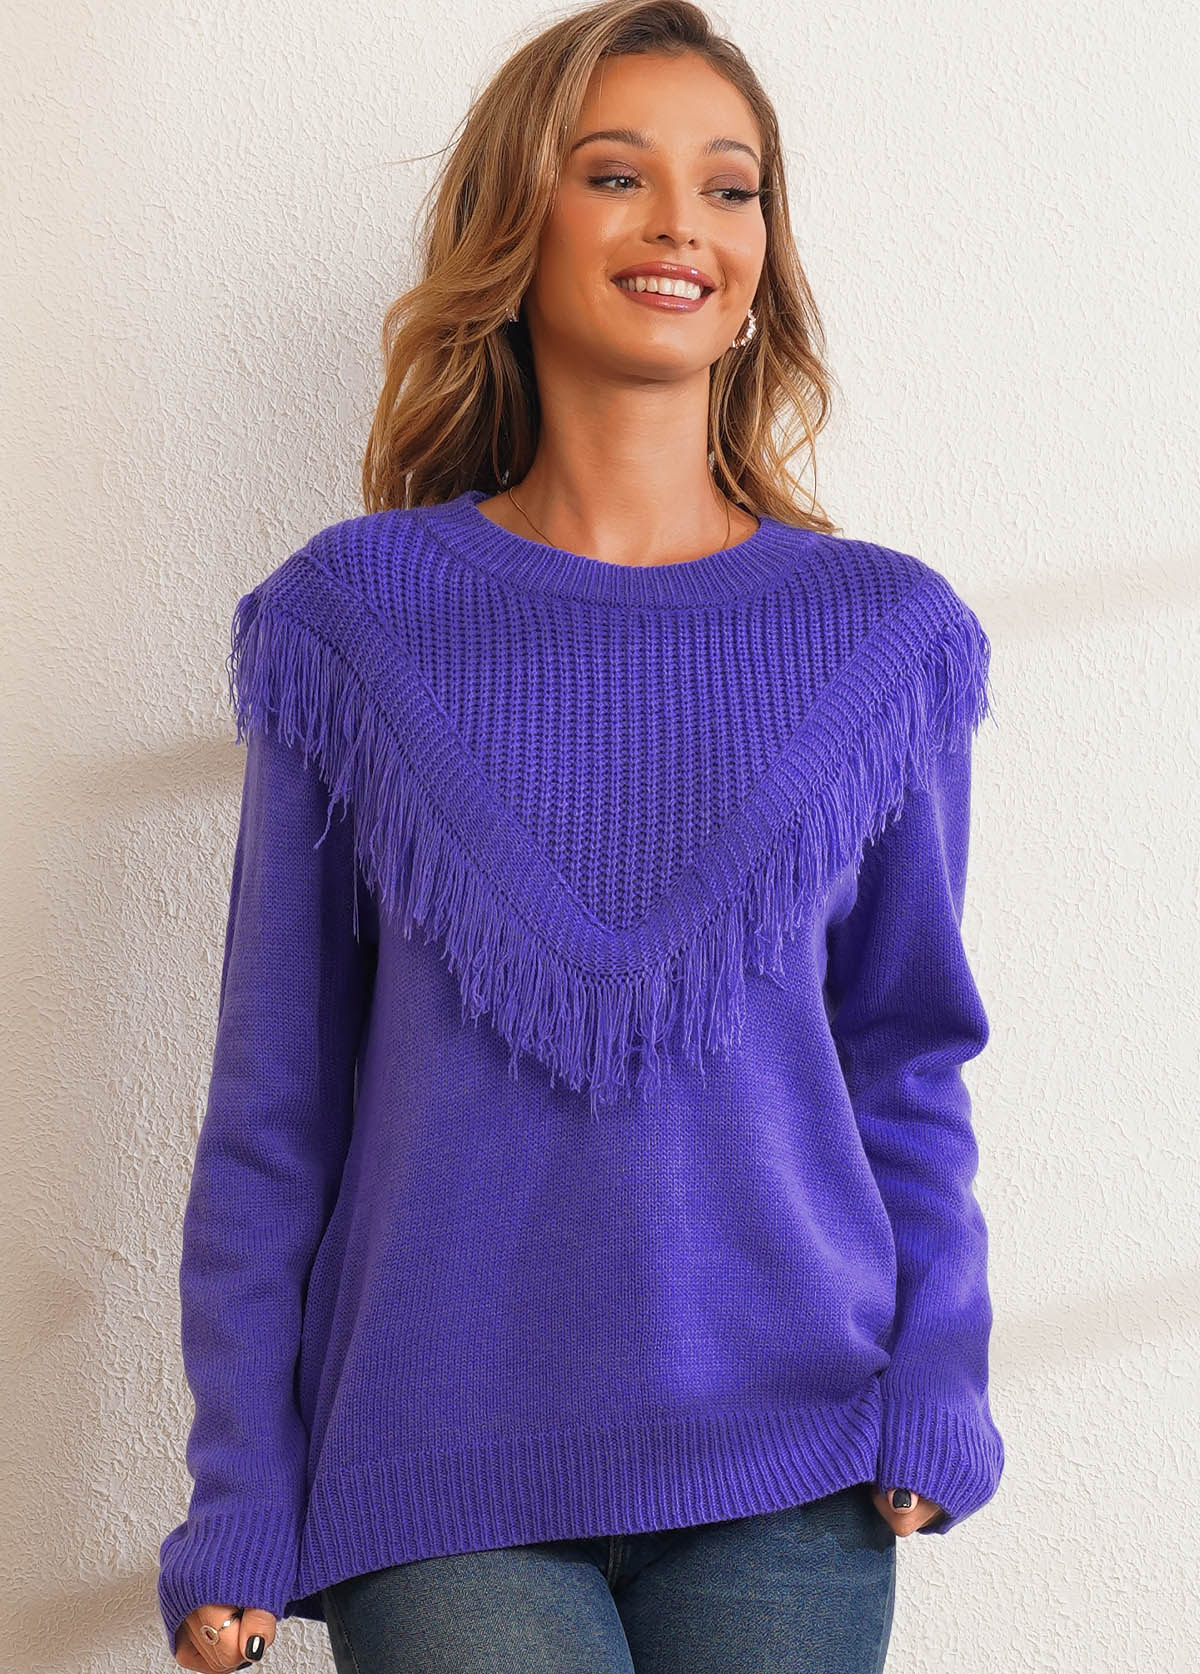 Tassel Solid Long Sleeve Round Neck Sweater